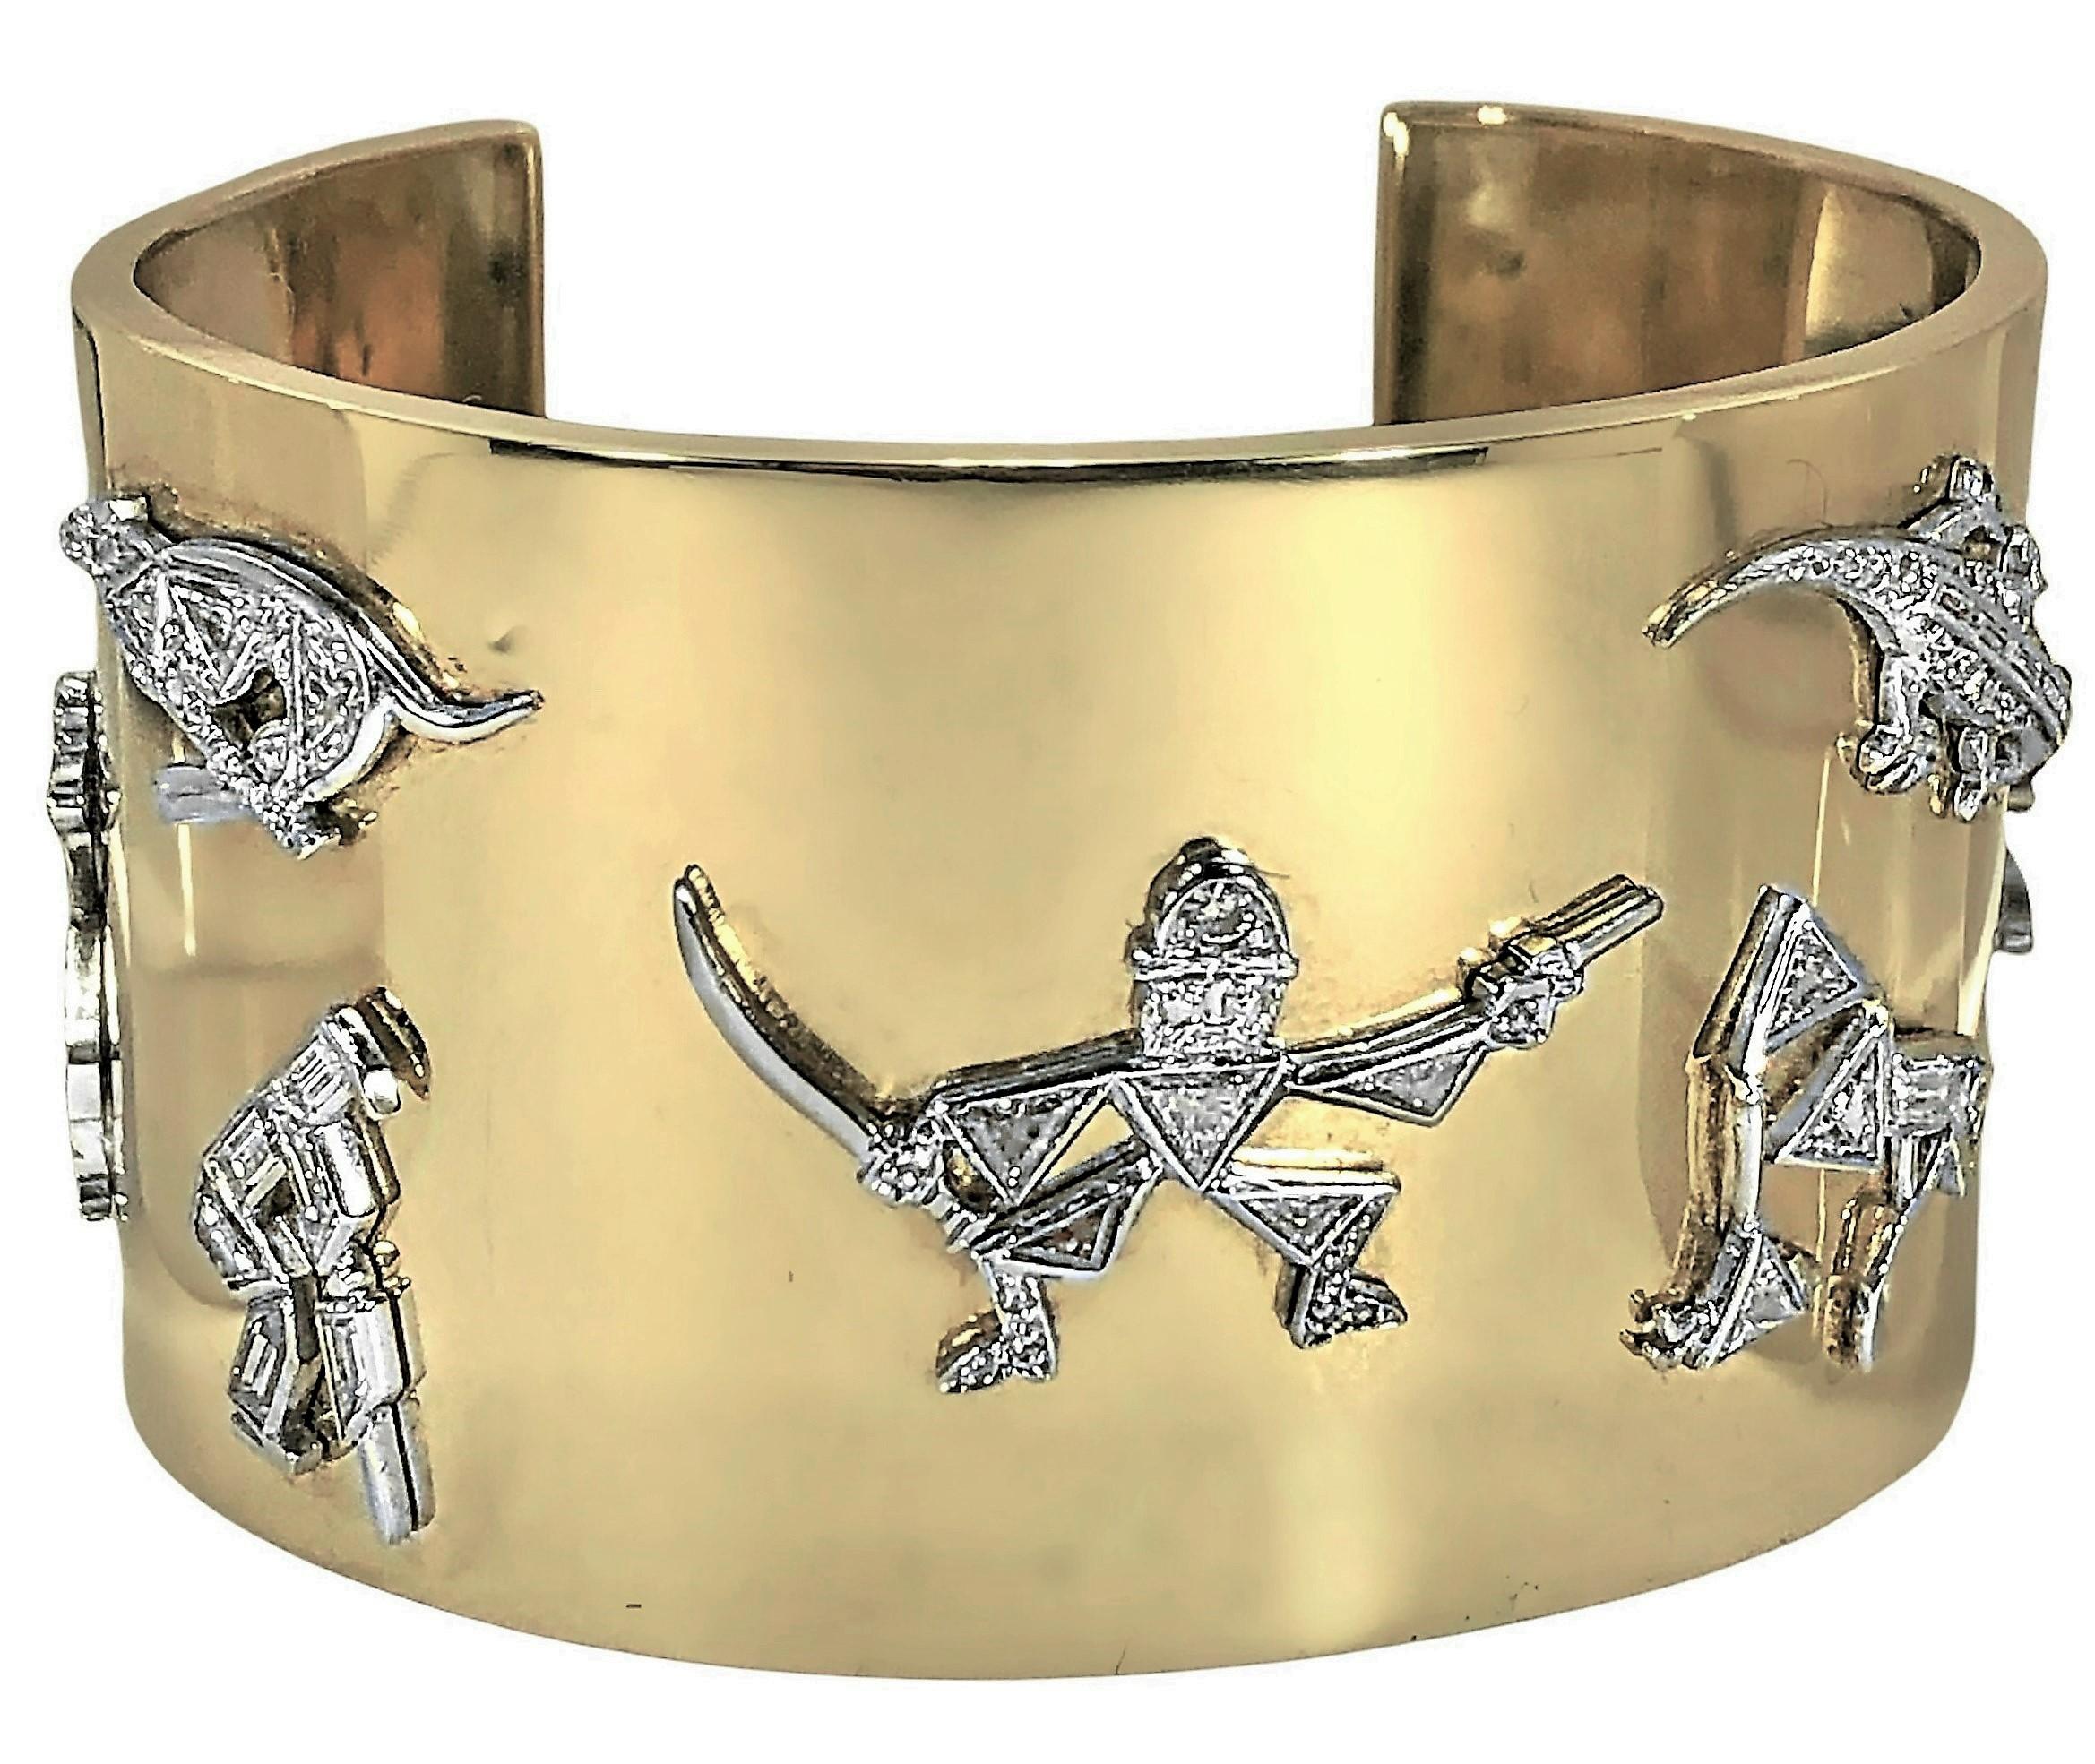 This wonderful 14K yellow gold Retro period cuff is mounted with ten handmade, platinum and diamond Art Deco charms, all of which represent something personal and special to the gentleman who had it made as a gift for his lady in March of 1940, as